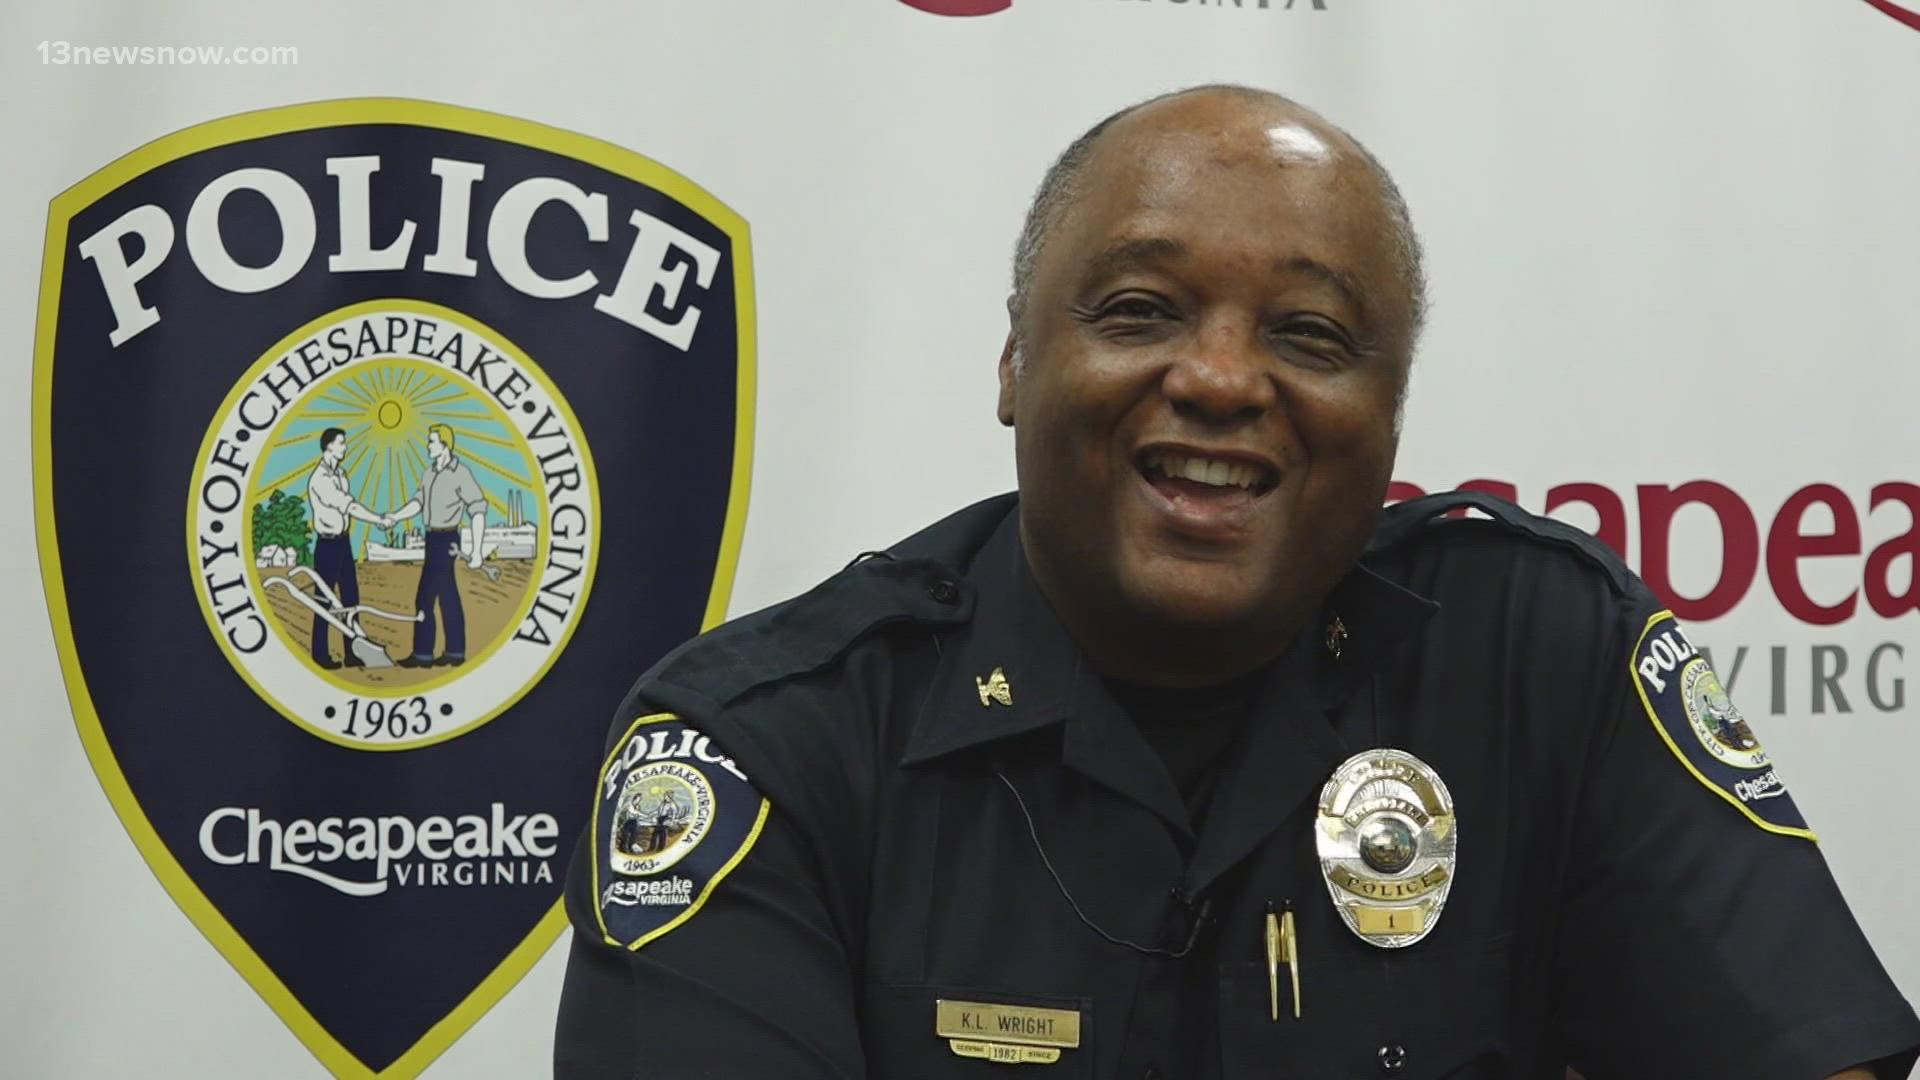 In his tenure with CPD, Wright trained other officers, led both the Second and Fifth precincts, and has championed crime reduction programs for Chesapeake.